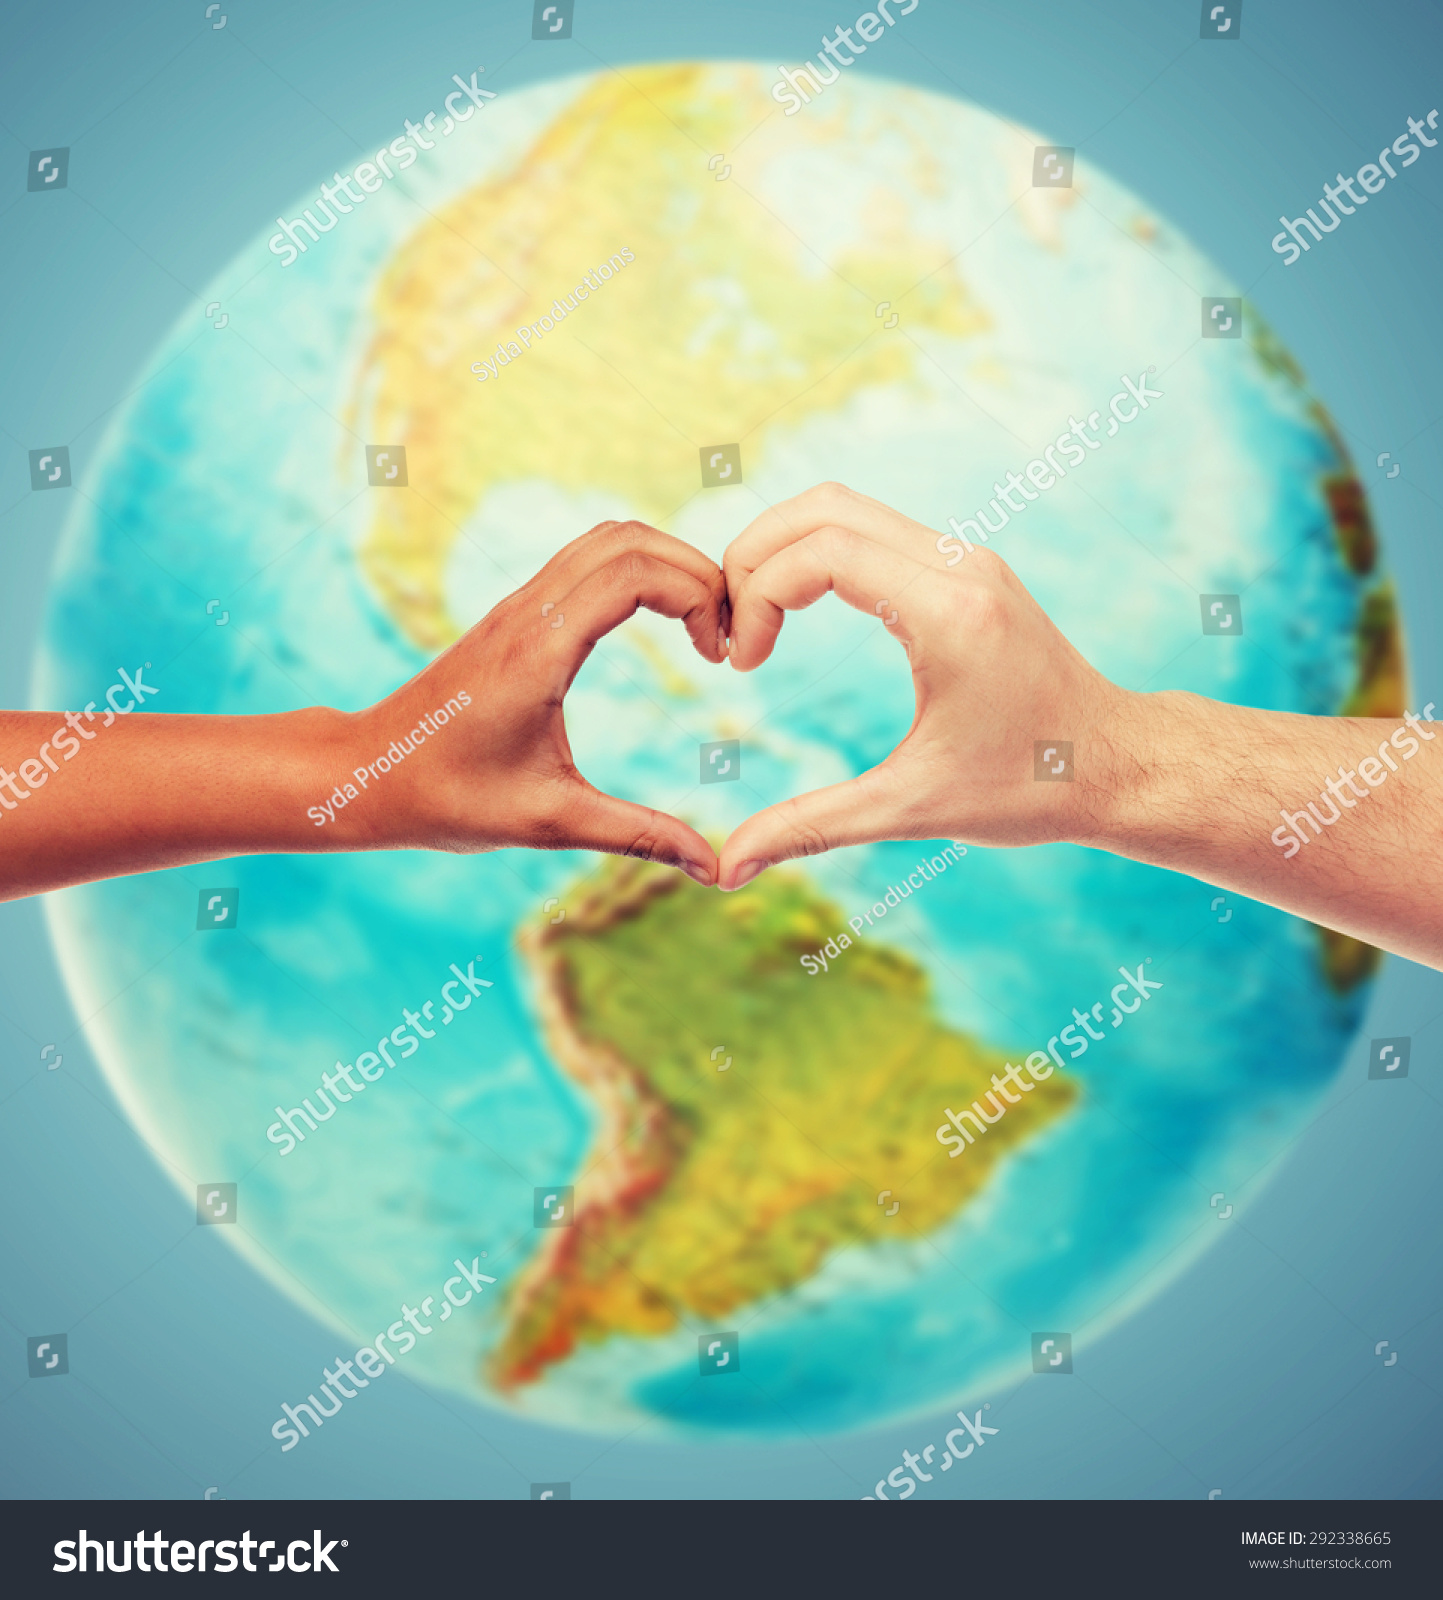 people, peace, love, life and environmental concept - close up of human hands showing heart shape gesture over earth globe and blue background #292338665